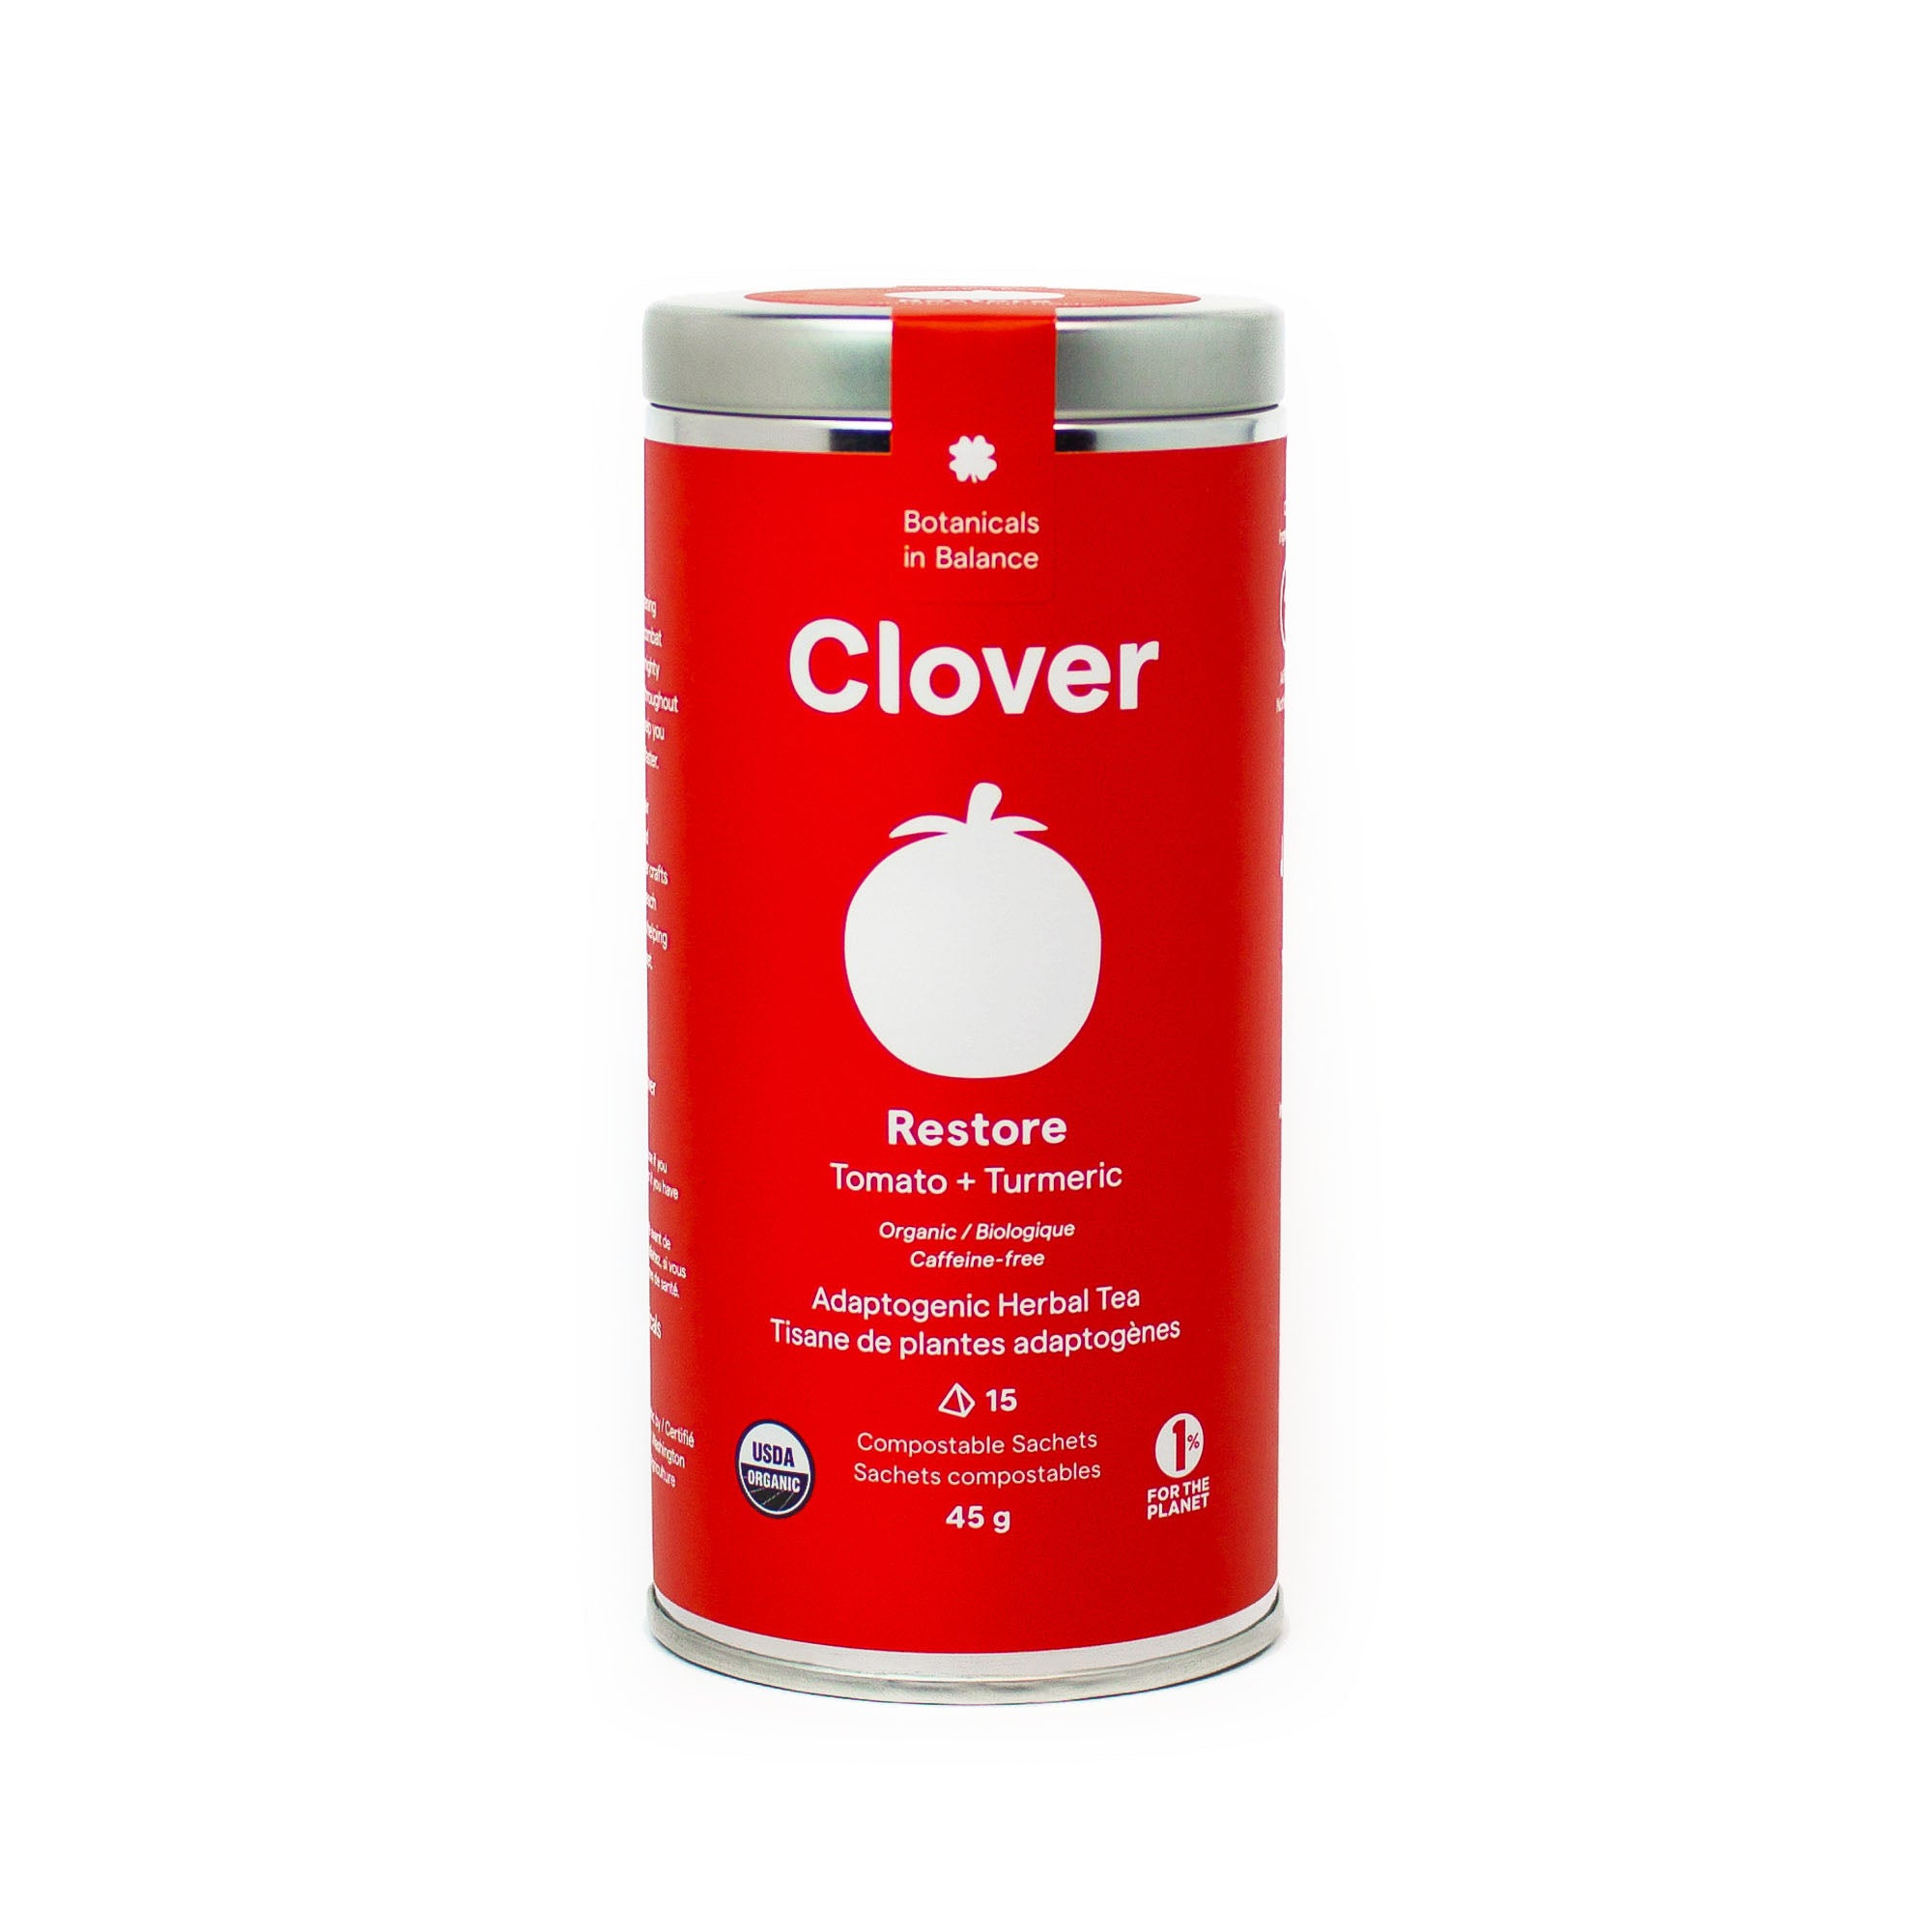 Clover Restore Tomato + Turmeric adaptogenic herbal tea steel canister, adaptogens for inflammation